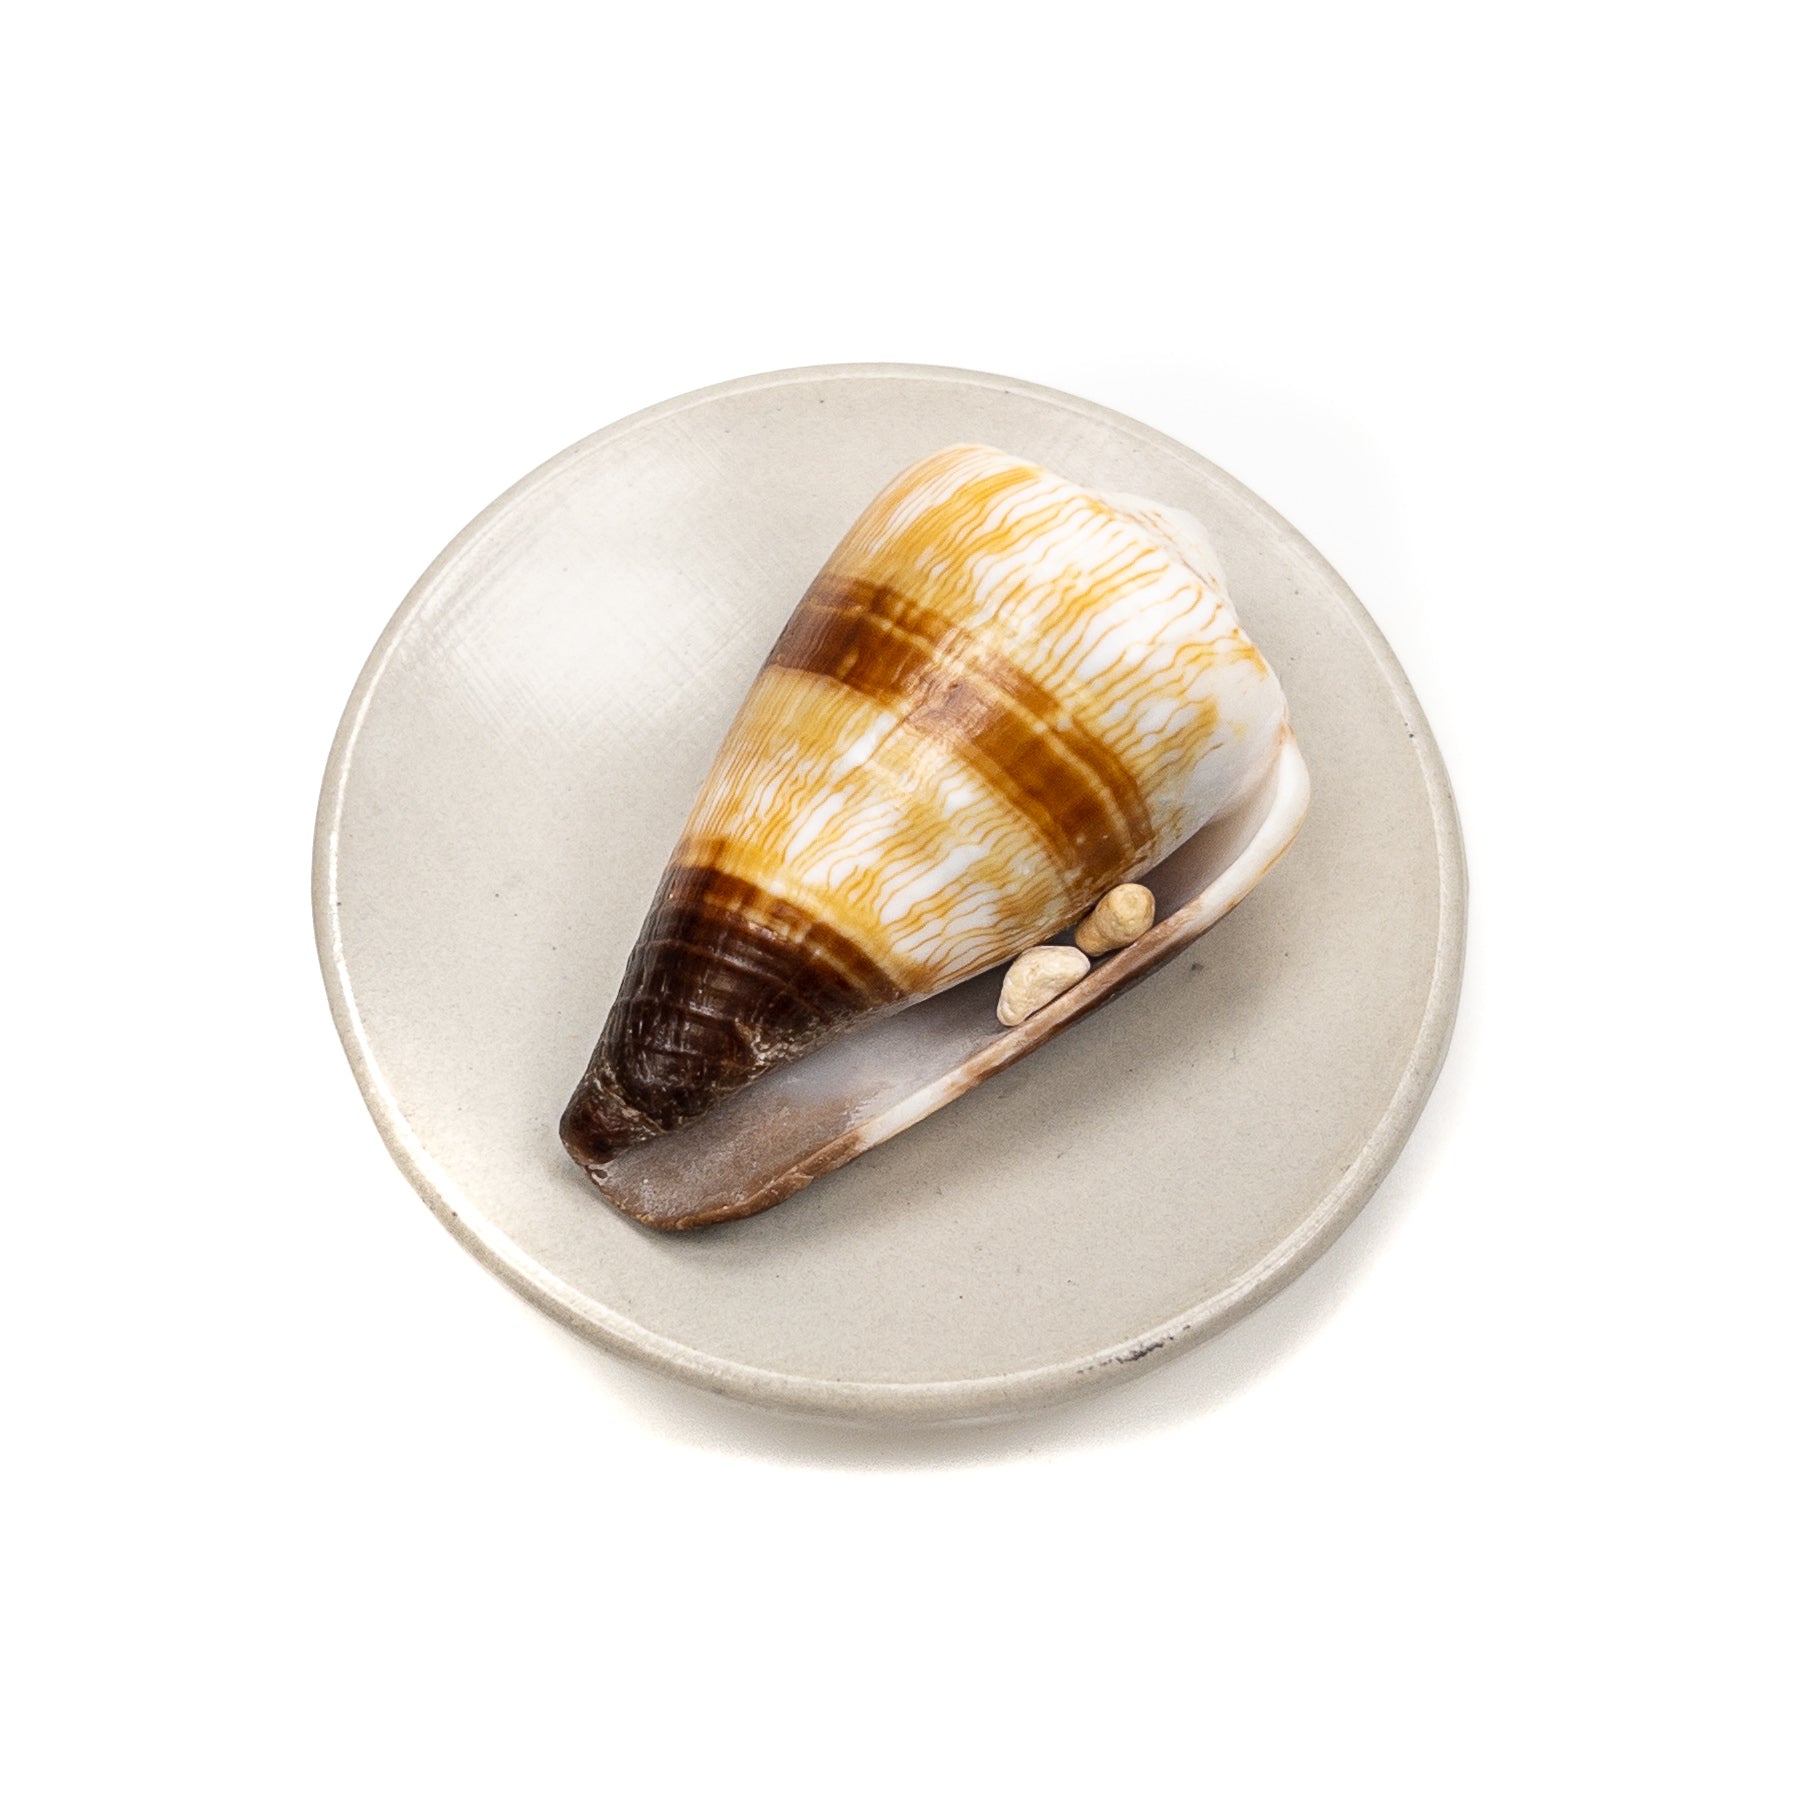 Deluxe Drilled Hawaiian Cone Shell - 1 pc.